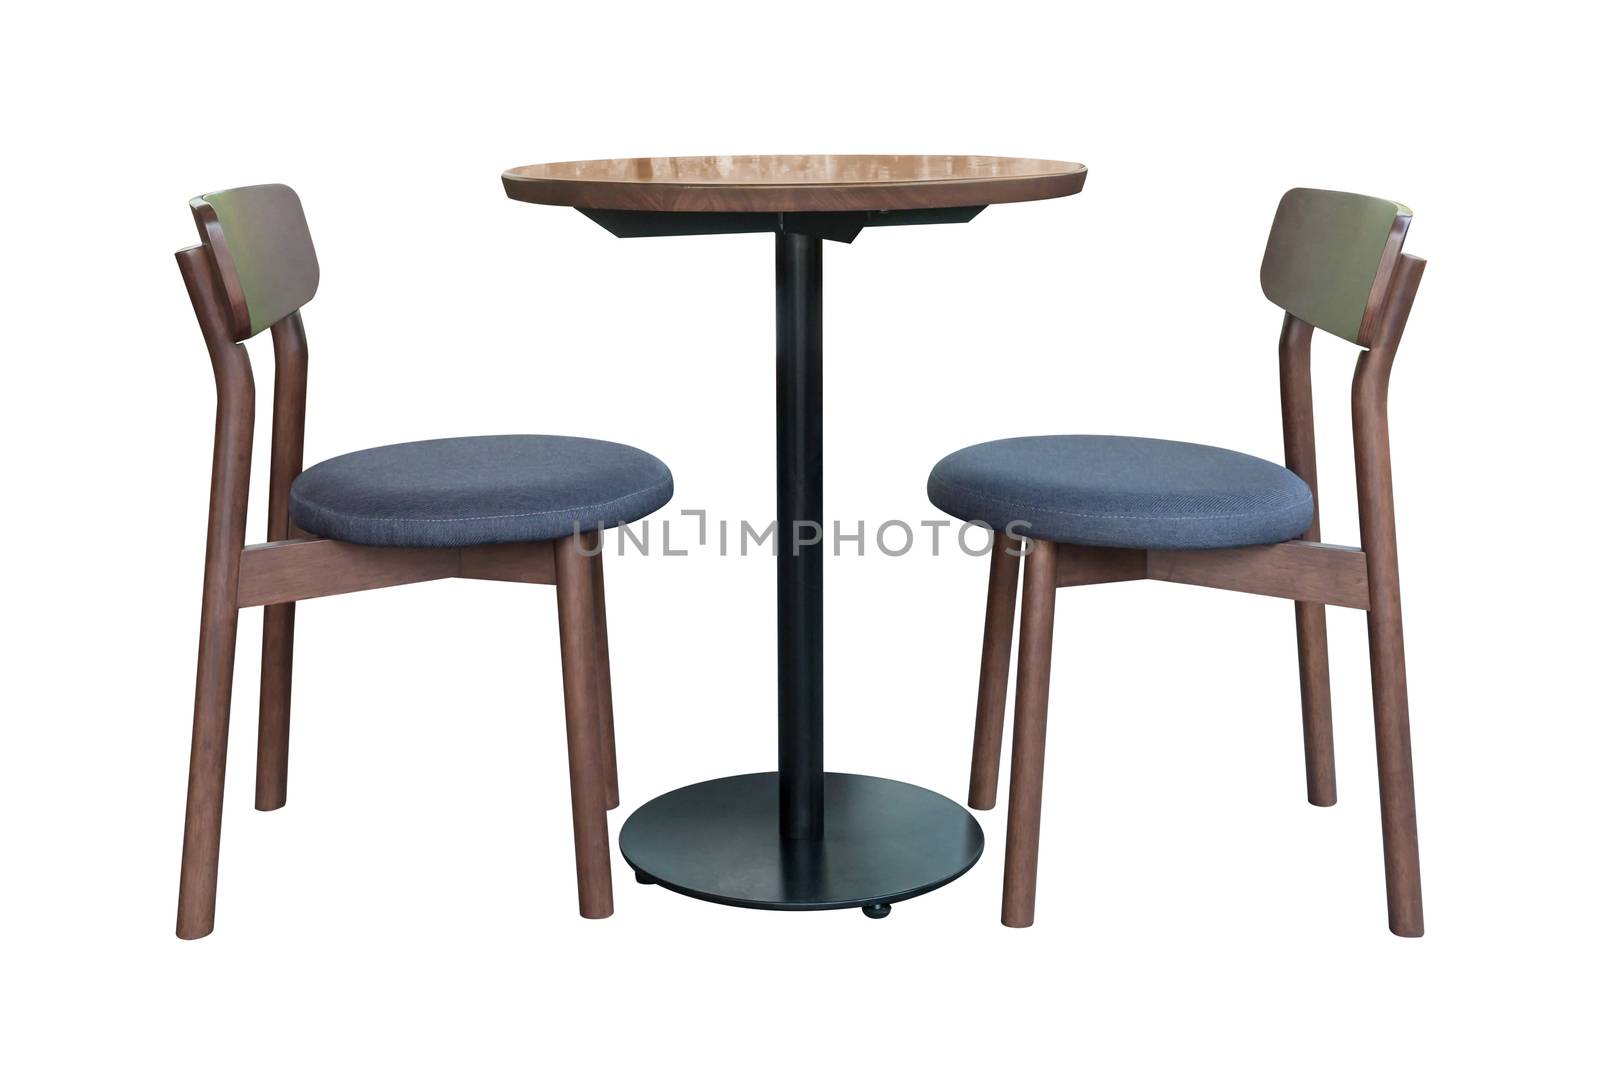 Modern table with steel leg and chair. by NuwatPhoto